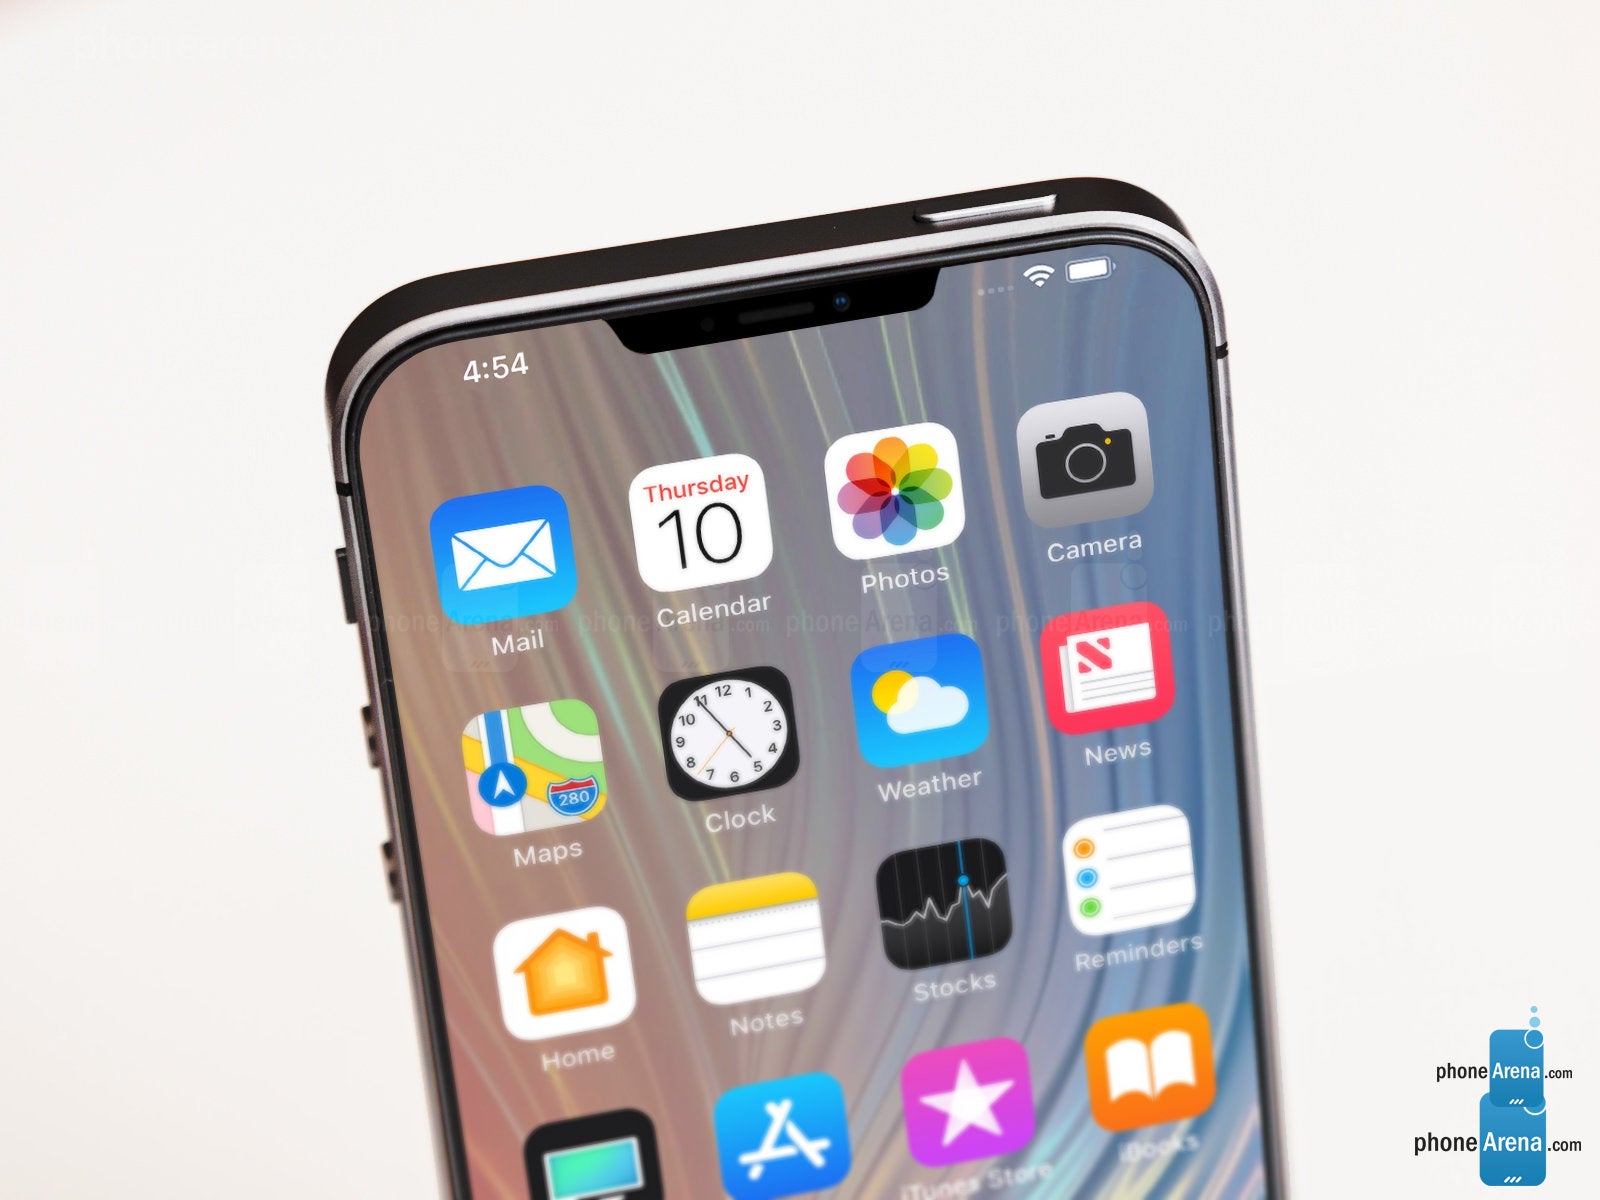 iPhone XE concept render - iPhone XE might be the compact Apple phone many people have been waiting for